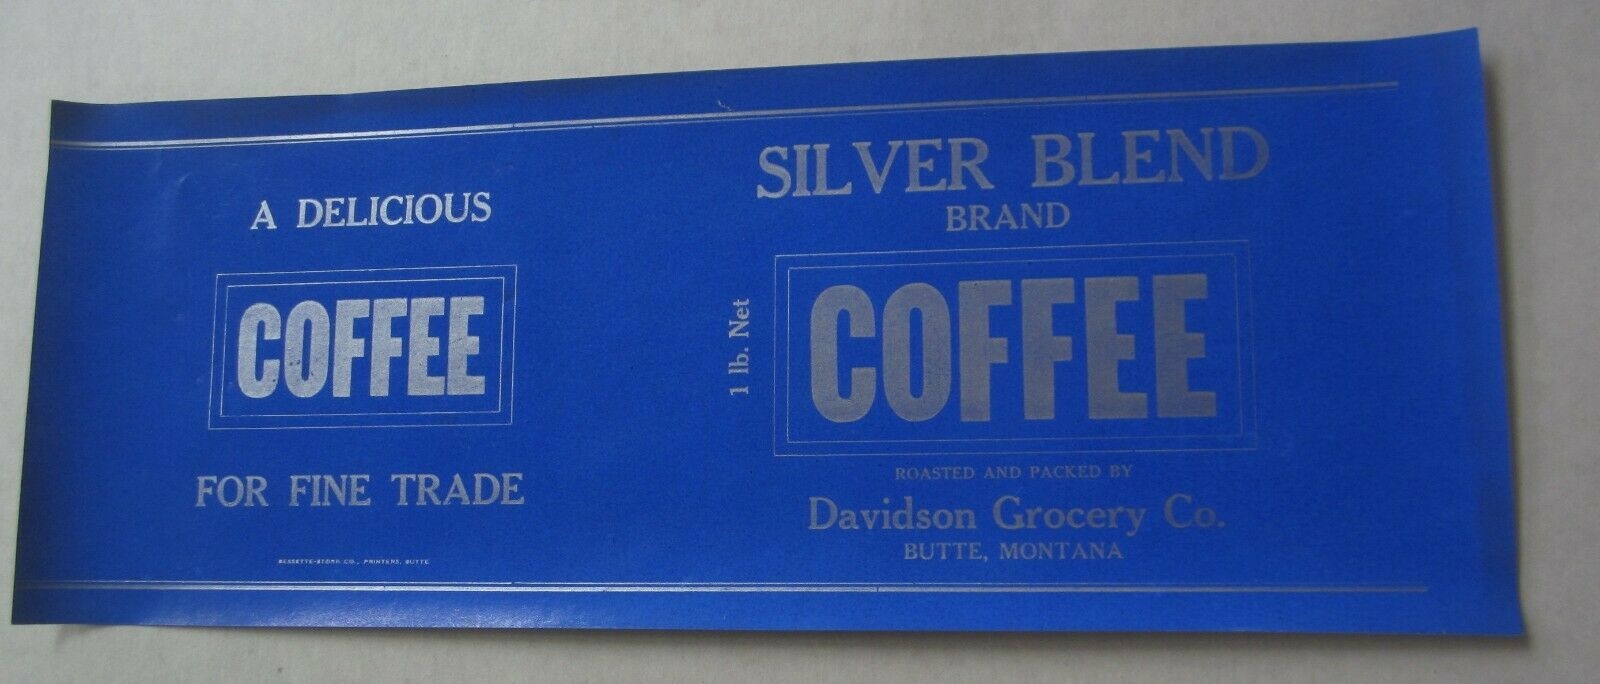 Old Vintage SILVER BLEND COFFEE - Can LABEL - D...